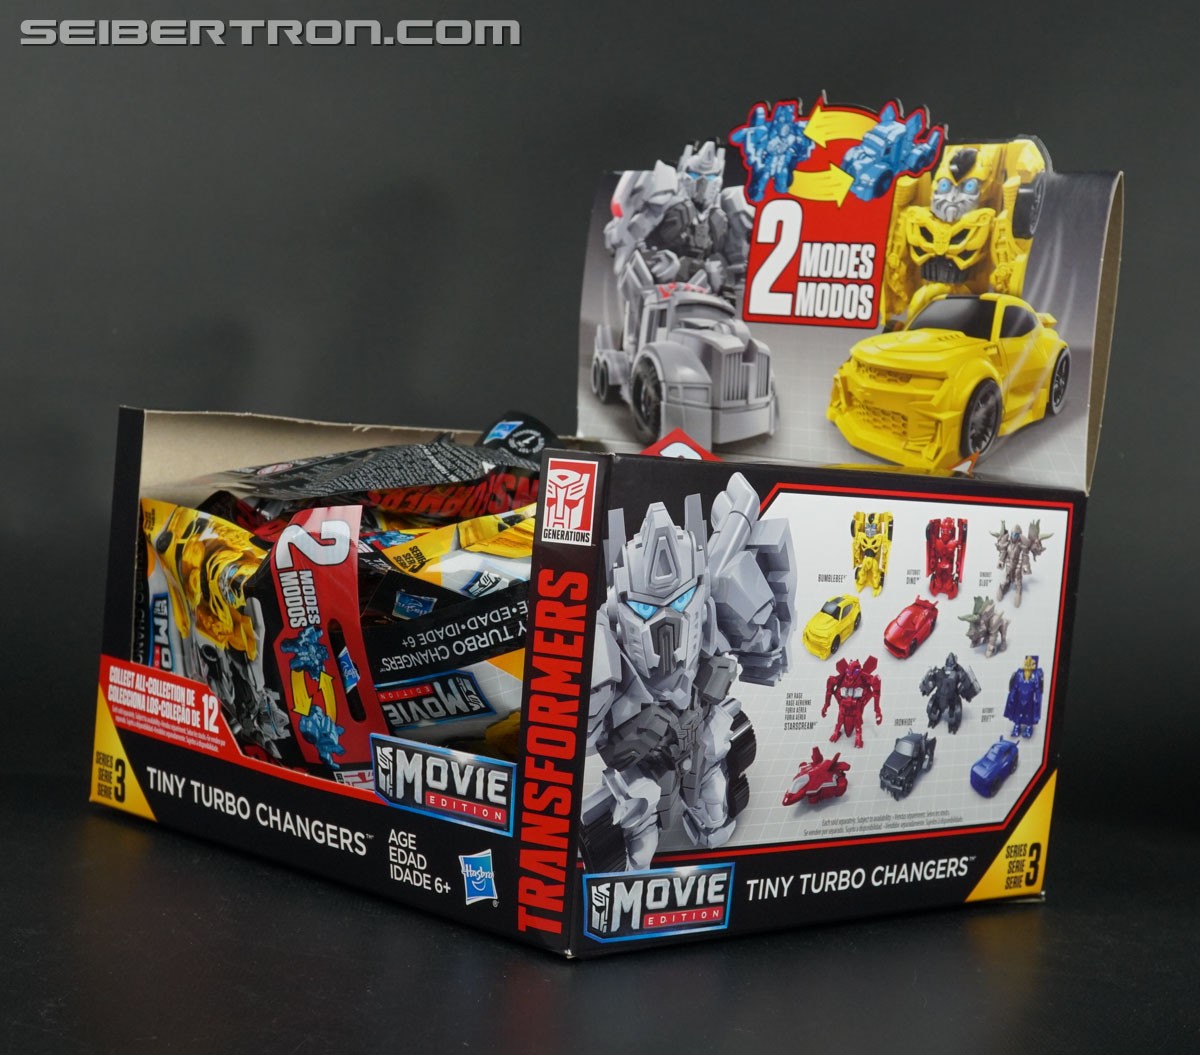 Transformers News: Transformers Tiny Titans Series 3 Packaging and Codes to Tell Which Figure is in Each Pack!